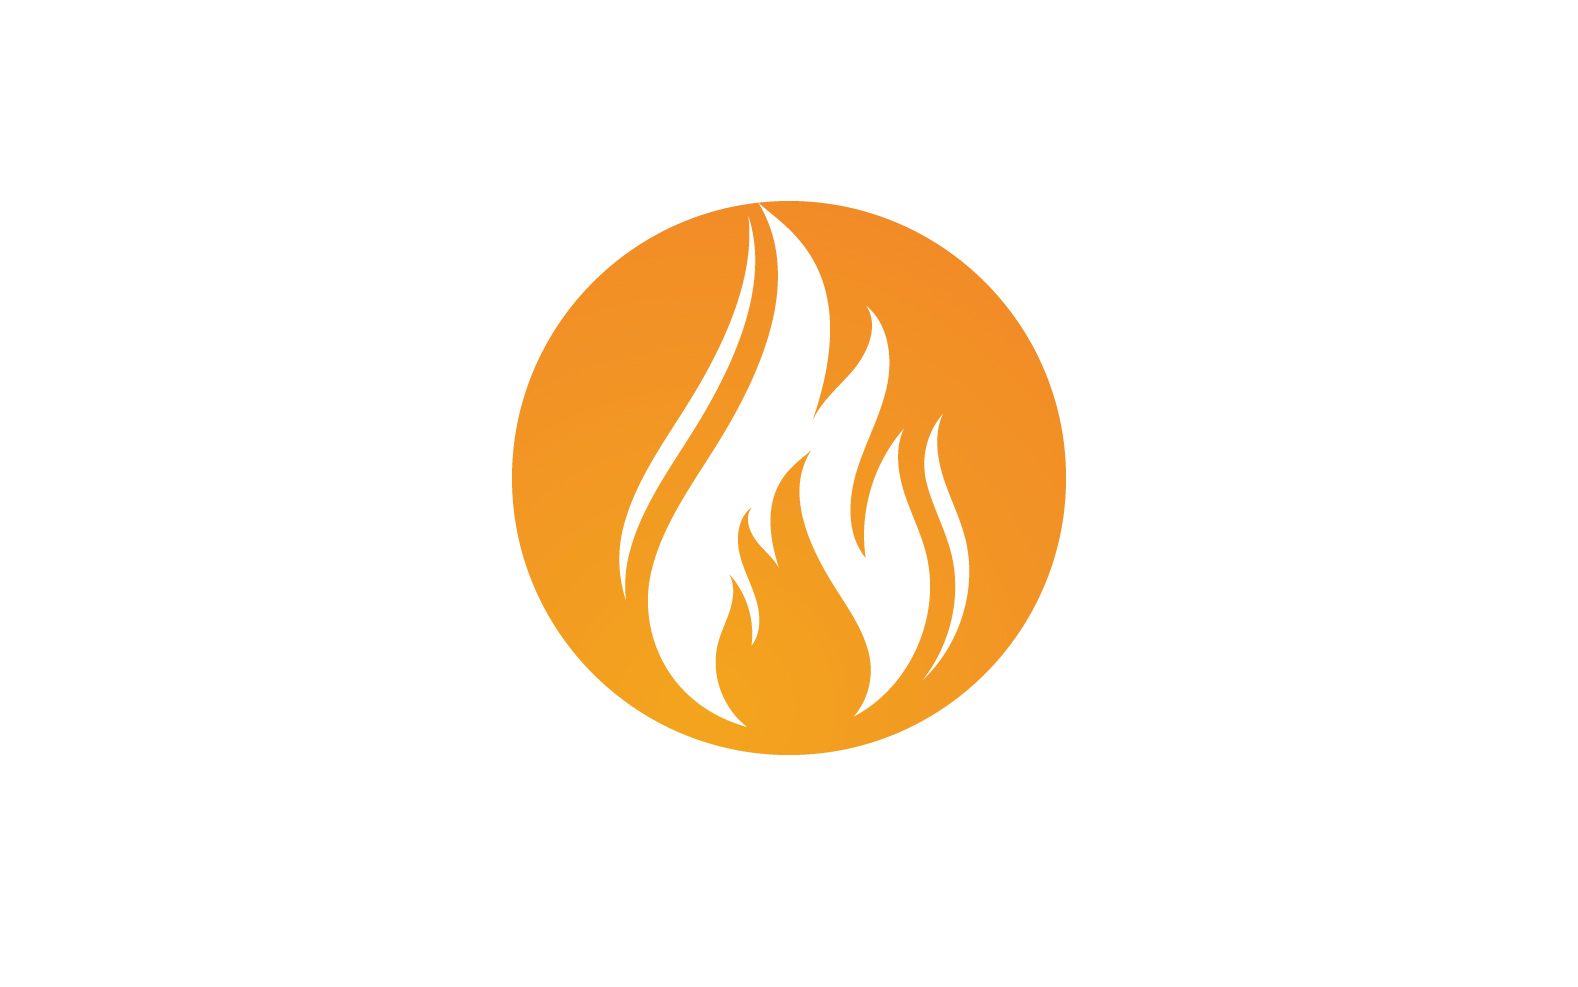 Fire Flame Vector Logo Hot Gas And Energy Symbol V54